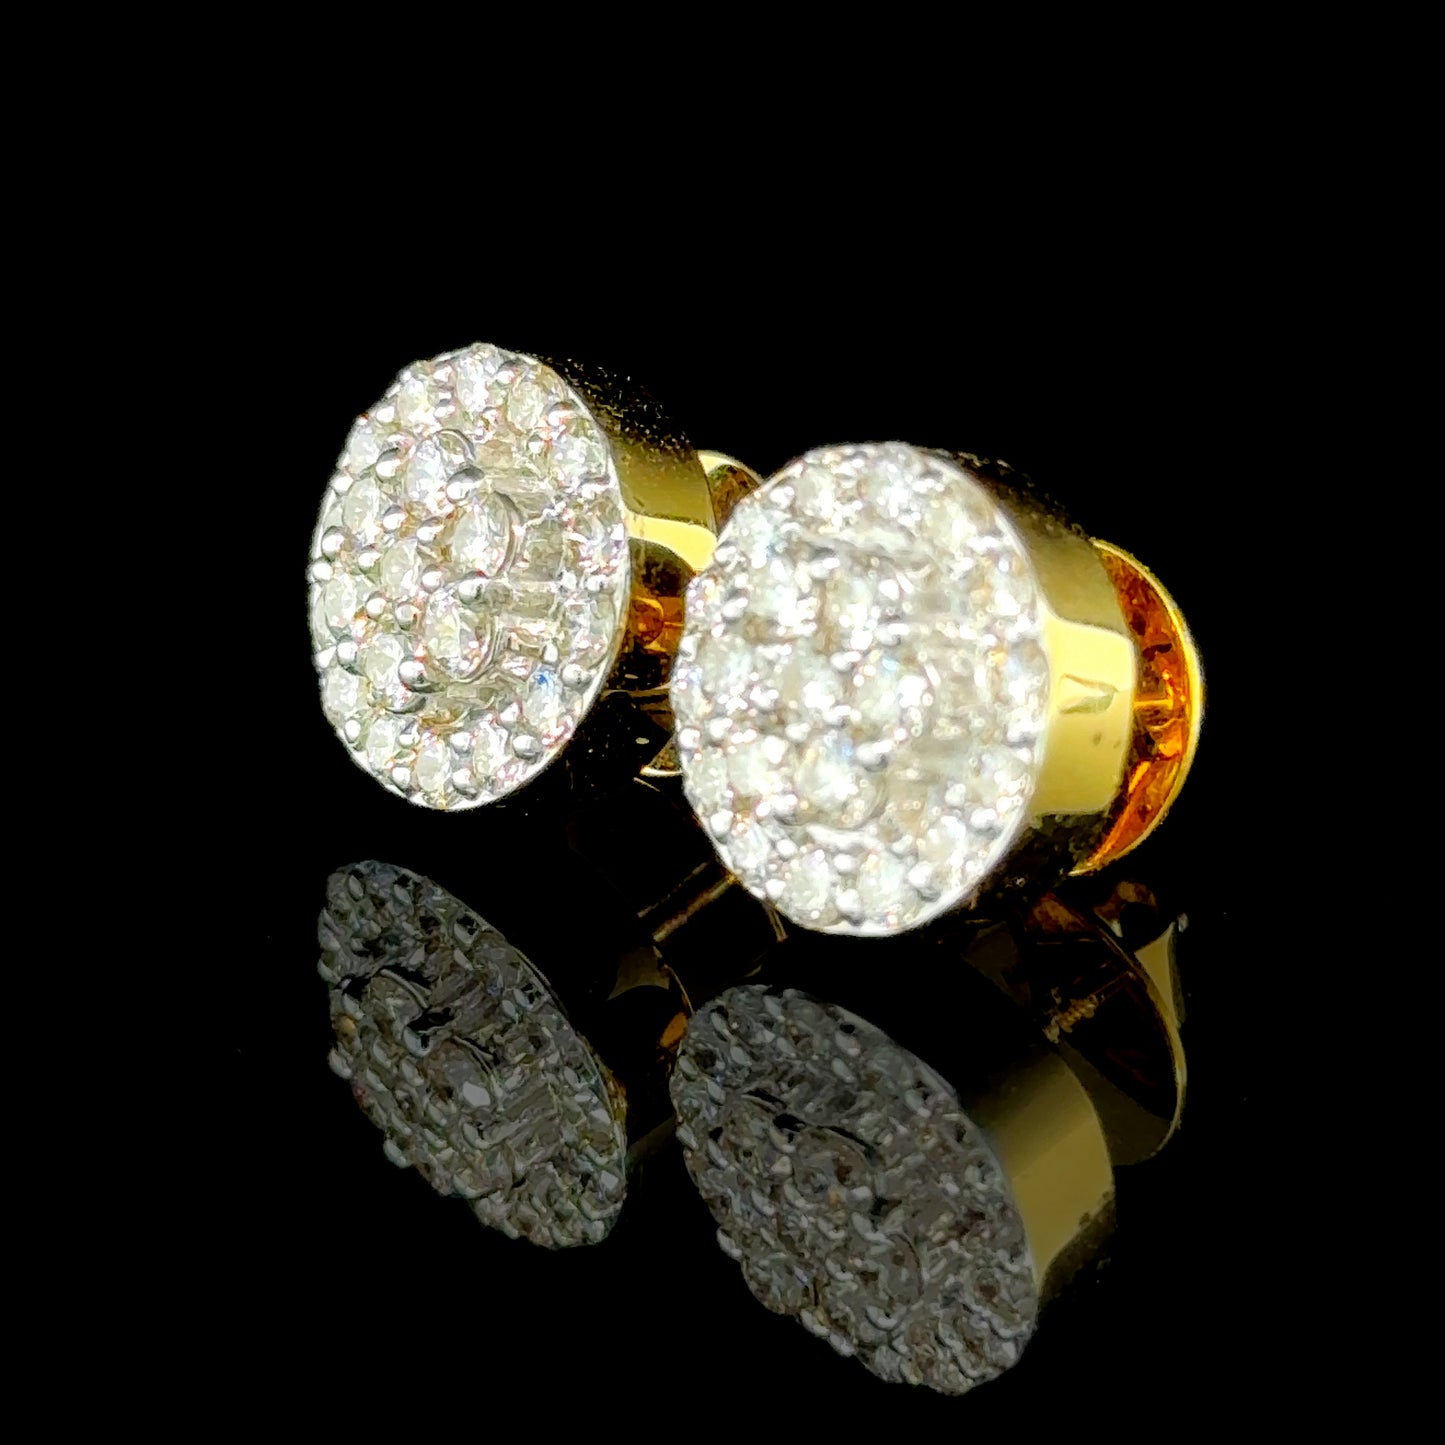 Statement diamond earrings in yellow gold with 1.97ct diamonds